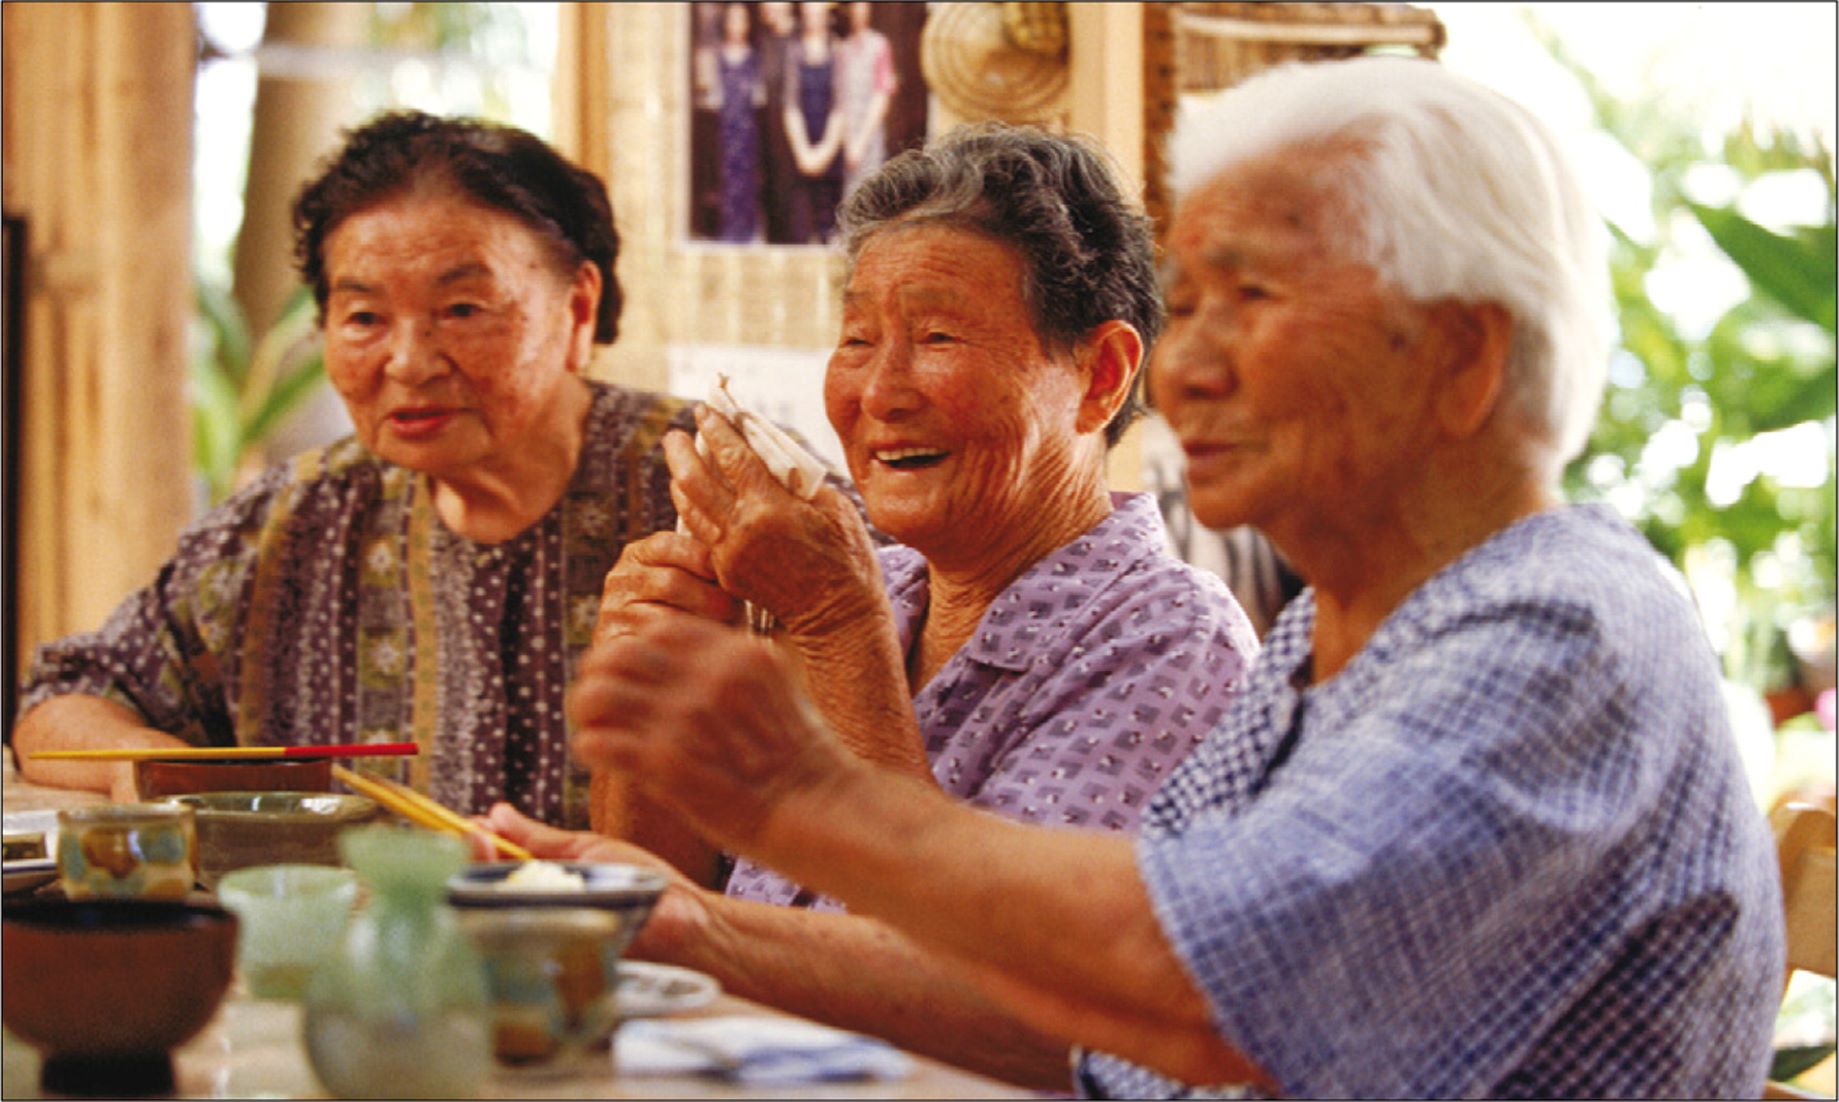 Japanese Life Expectancy Declines For First Time In Decade Due To COVID-19